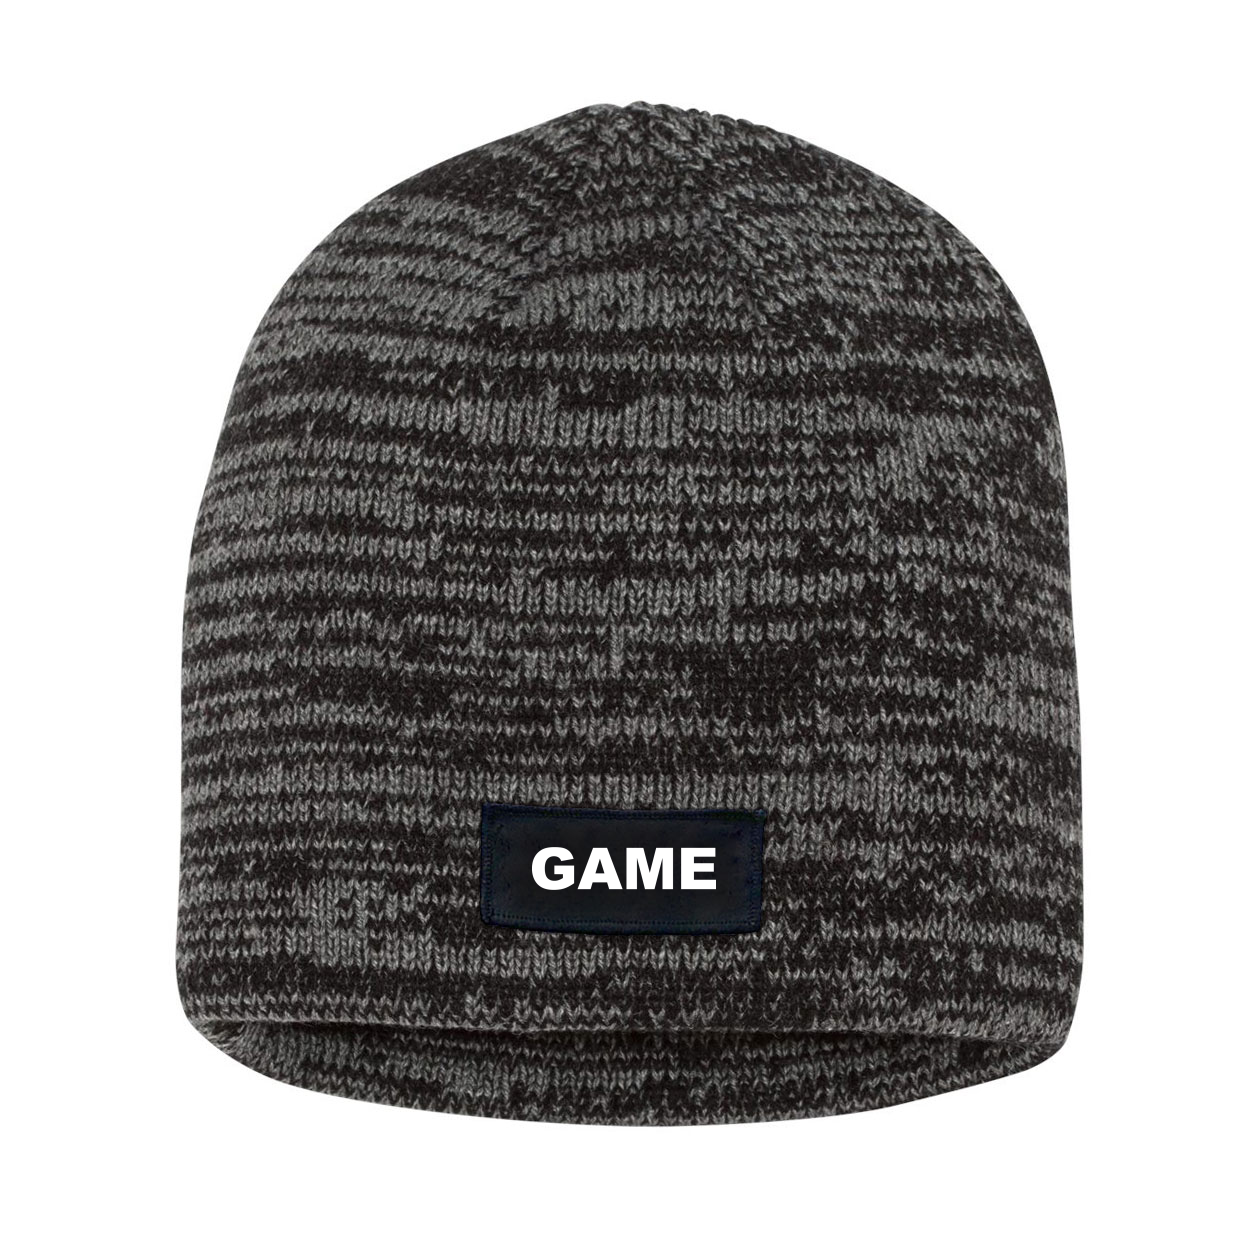 Game Brand Logo Night Out Woven Patch Skully Marled Knit Beanie Black/Gray